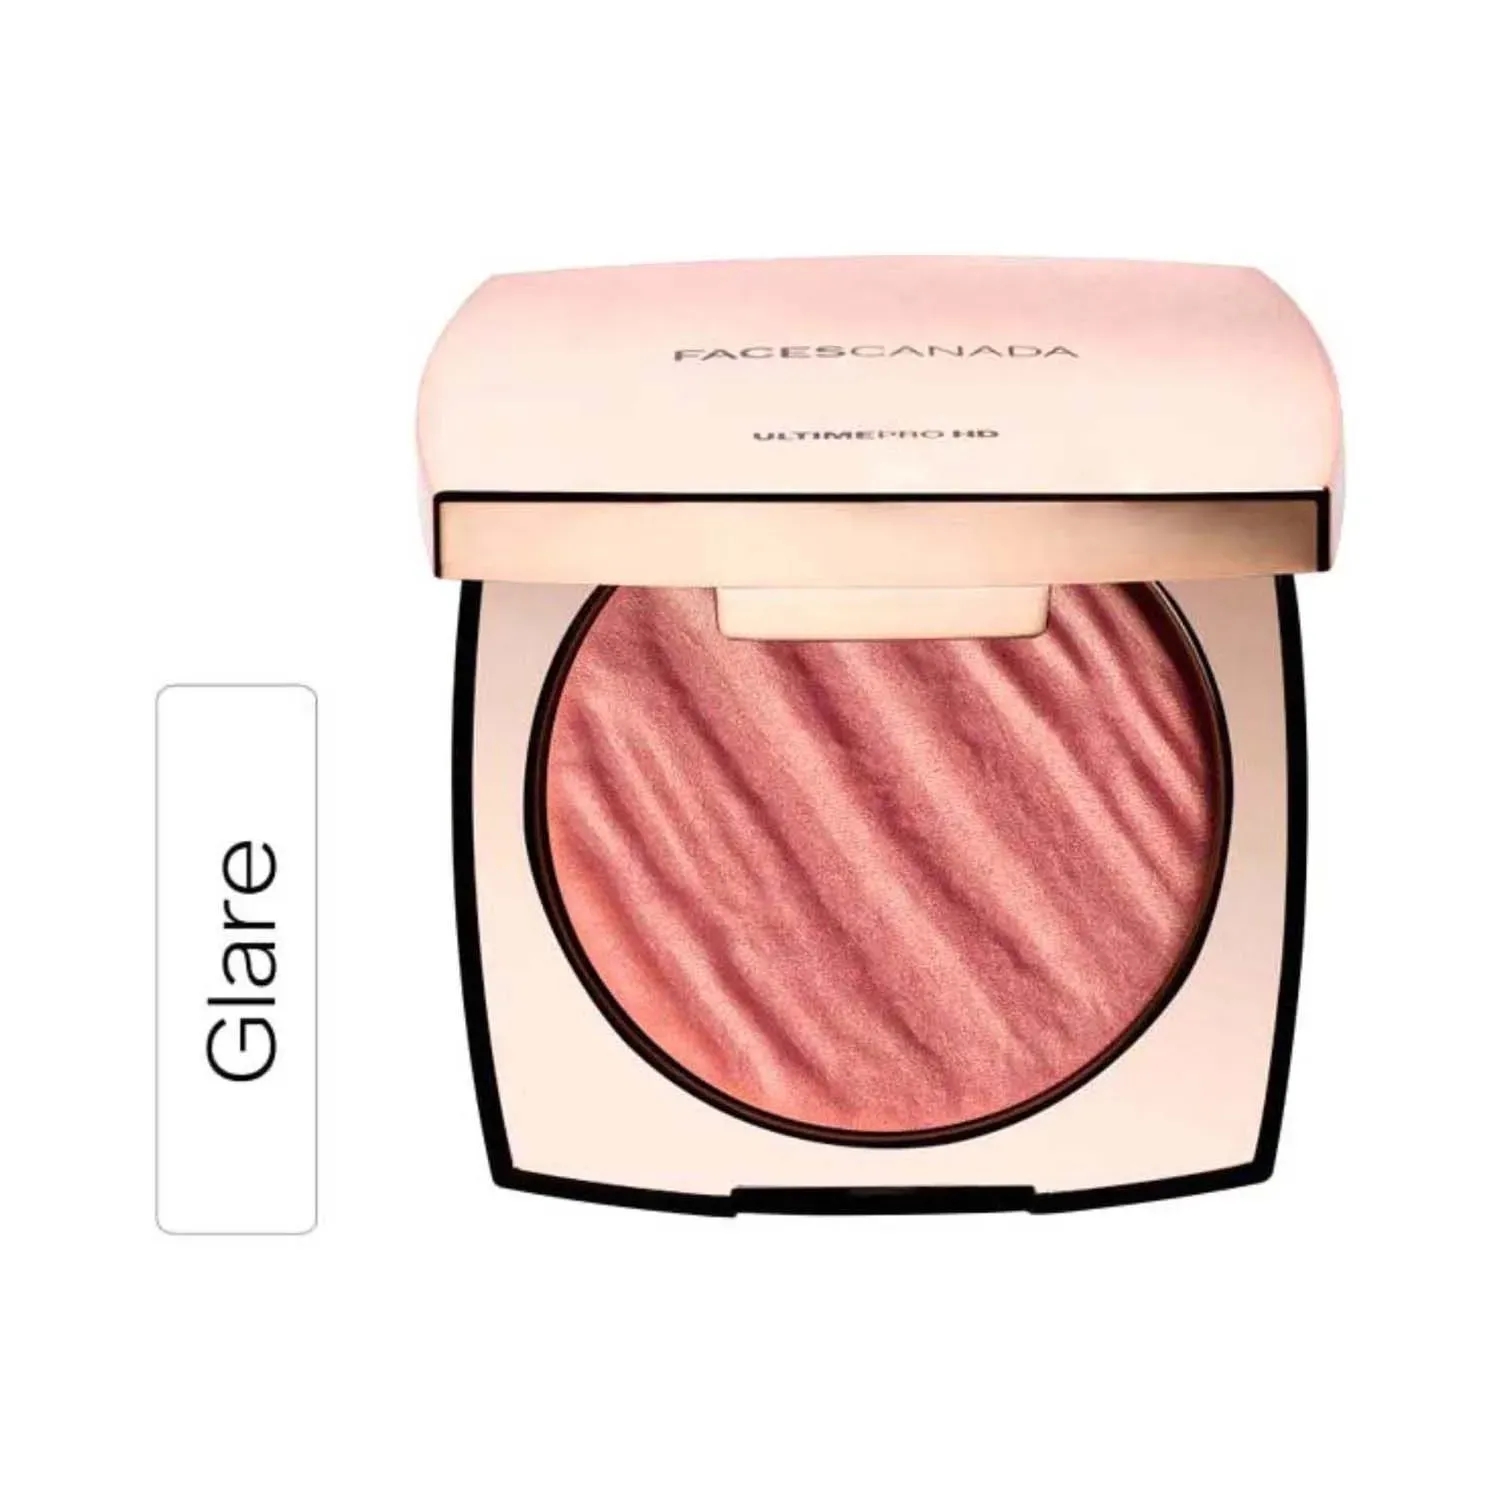 Faces Canada | Faces Canada Ultime Pro HD All That Glow Highlighter - 01 Glare (10.5g)